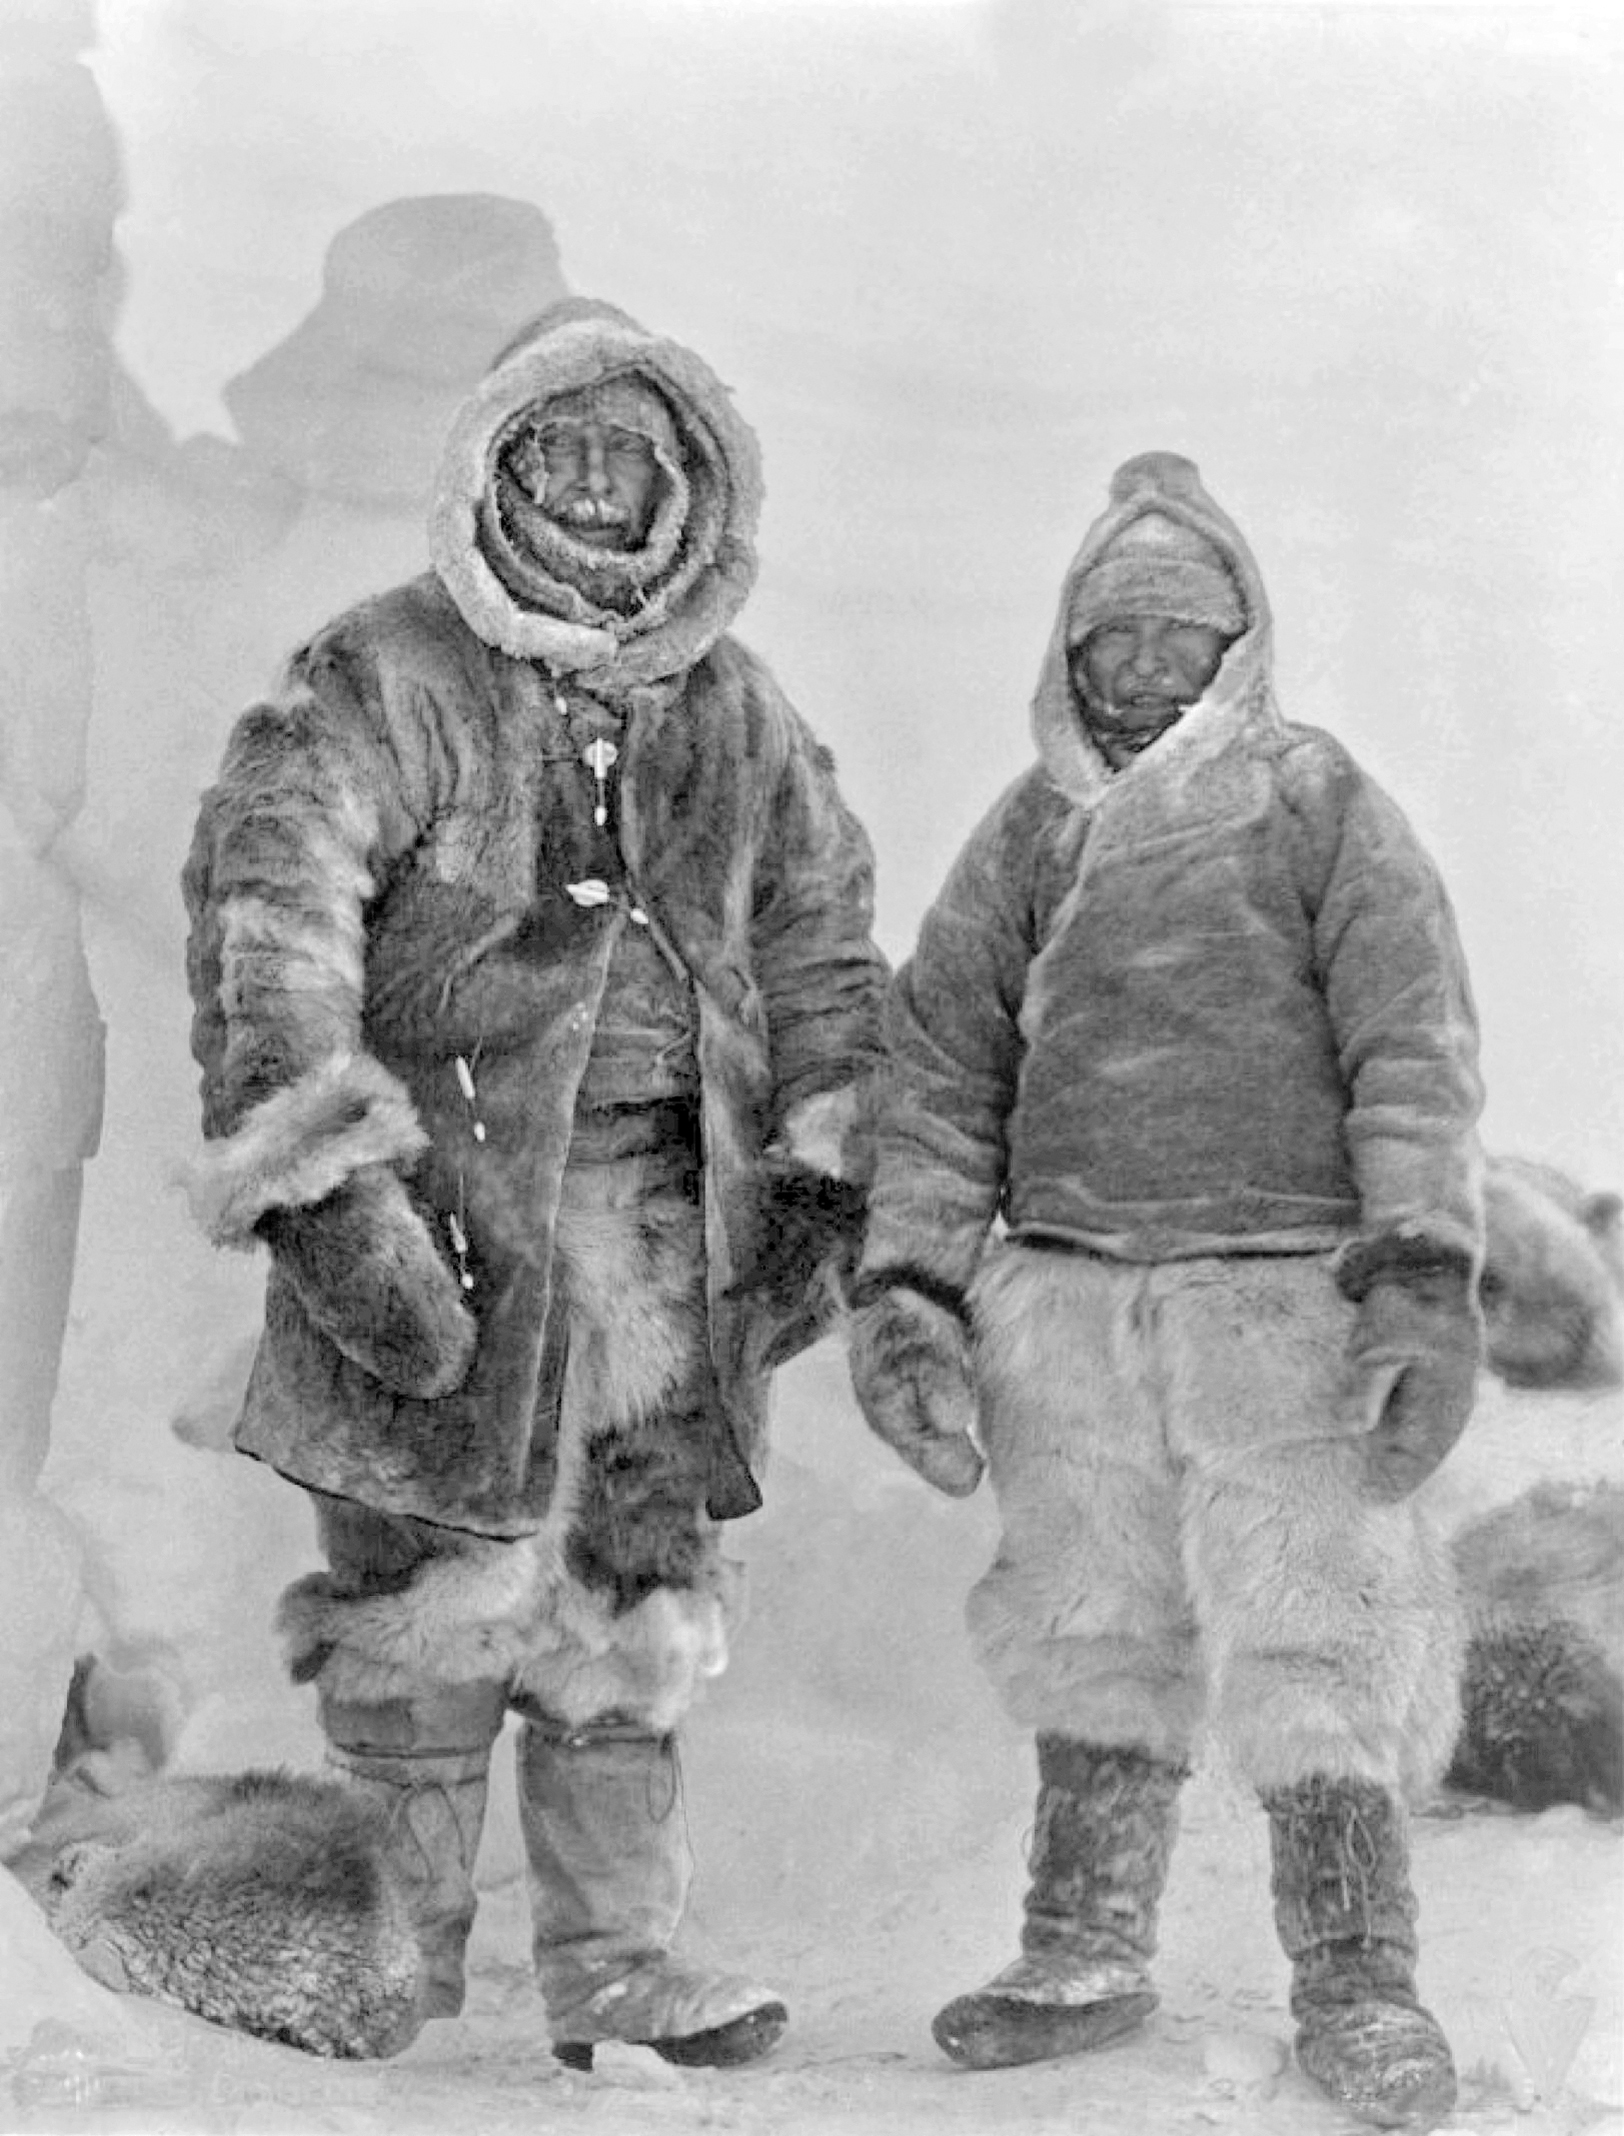 The last known image of Alfred Wegener in Greenland before his death. He is in a winter tundra in heavy coats.